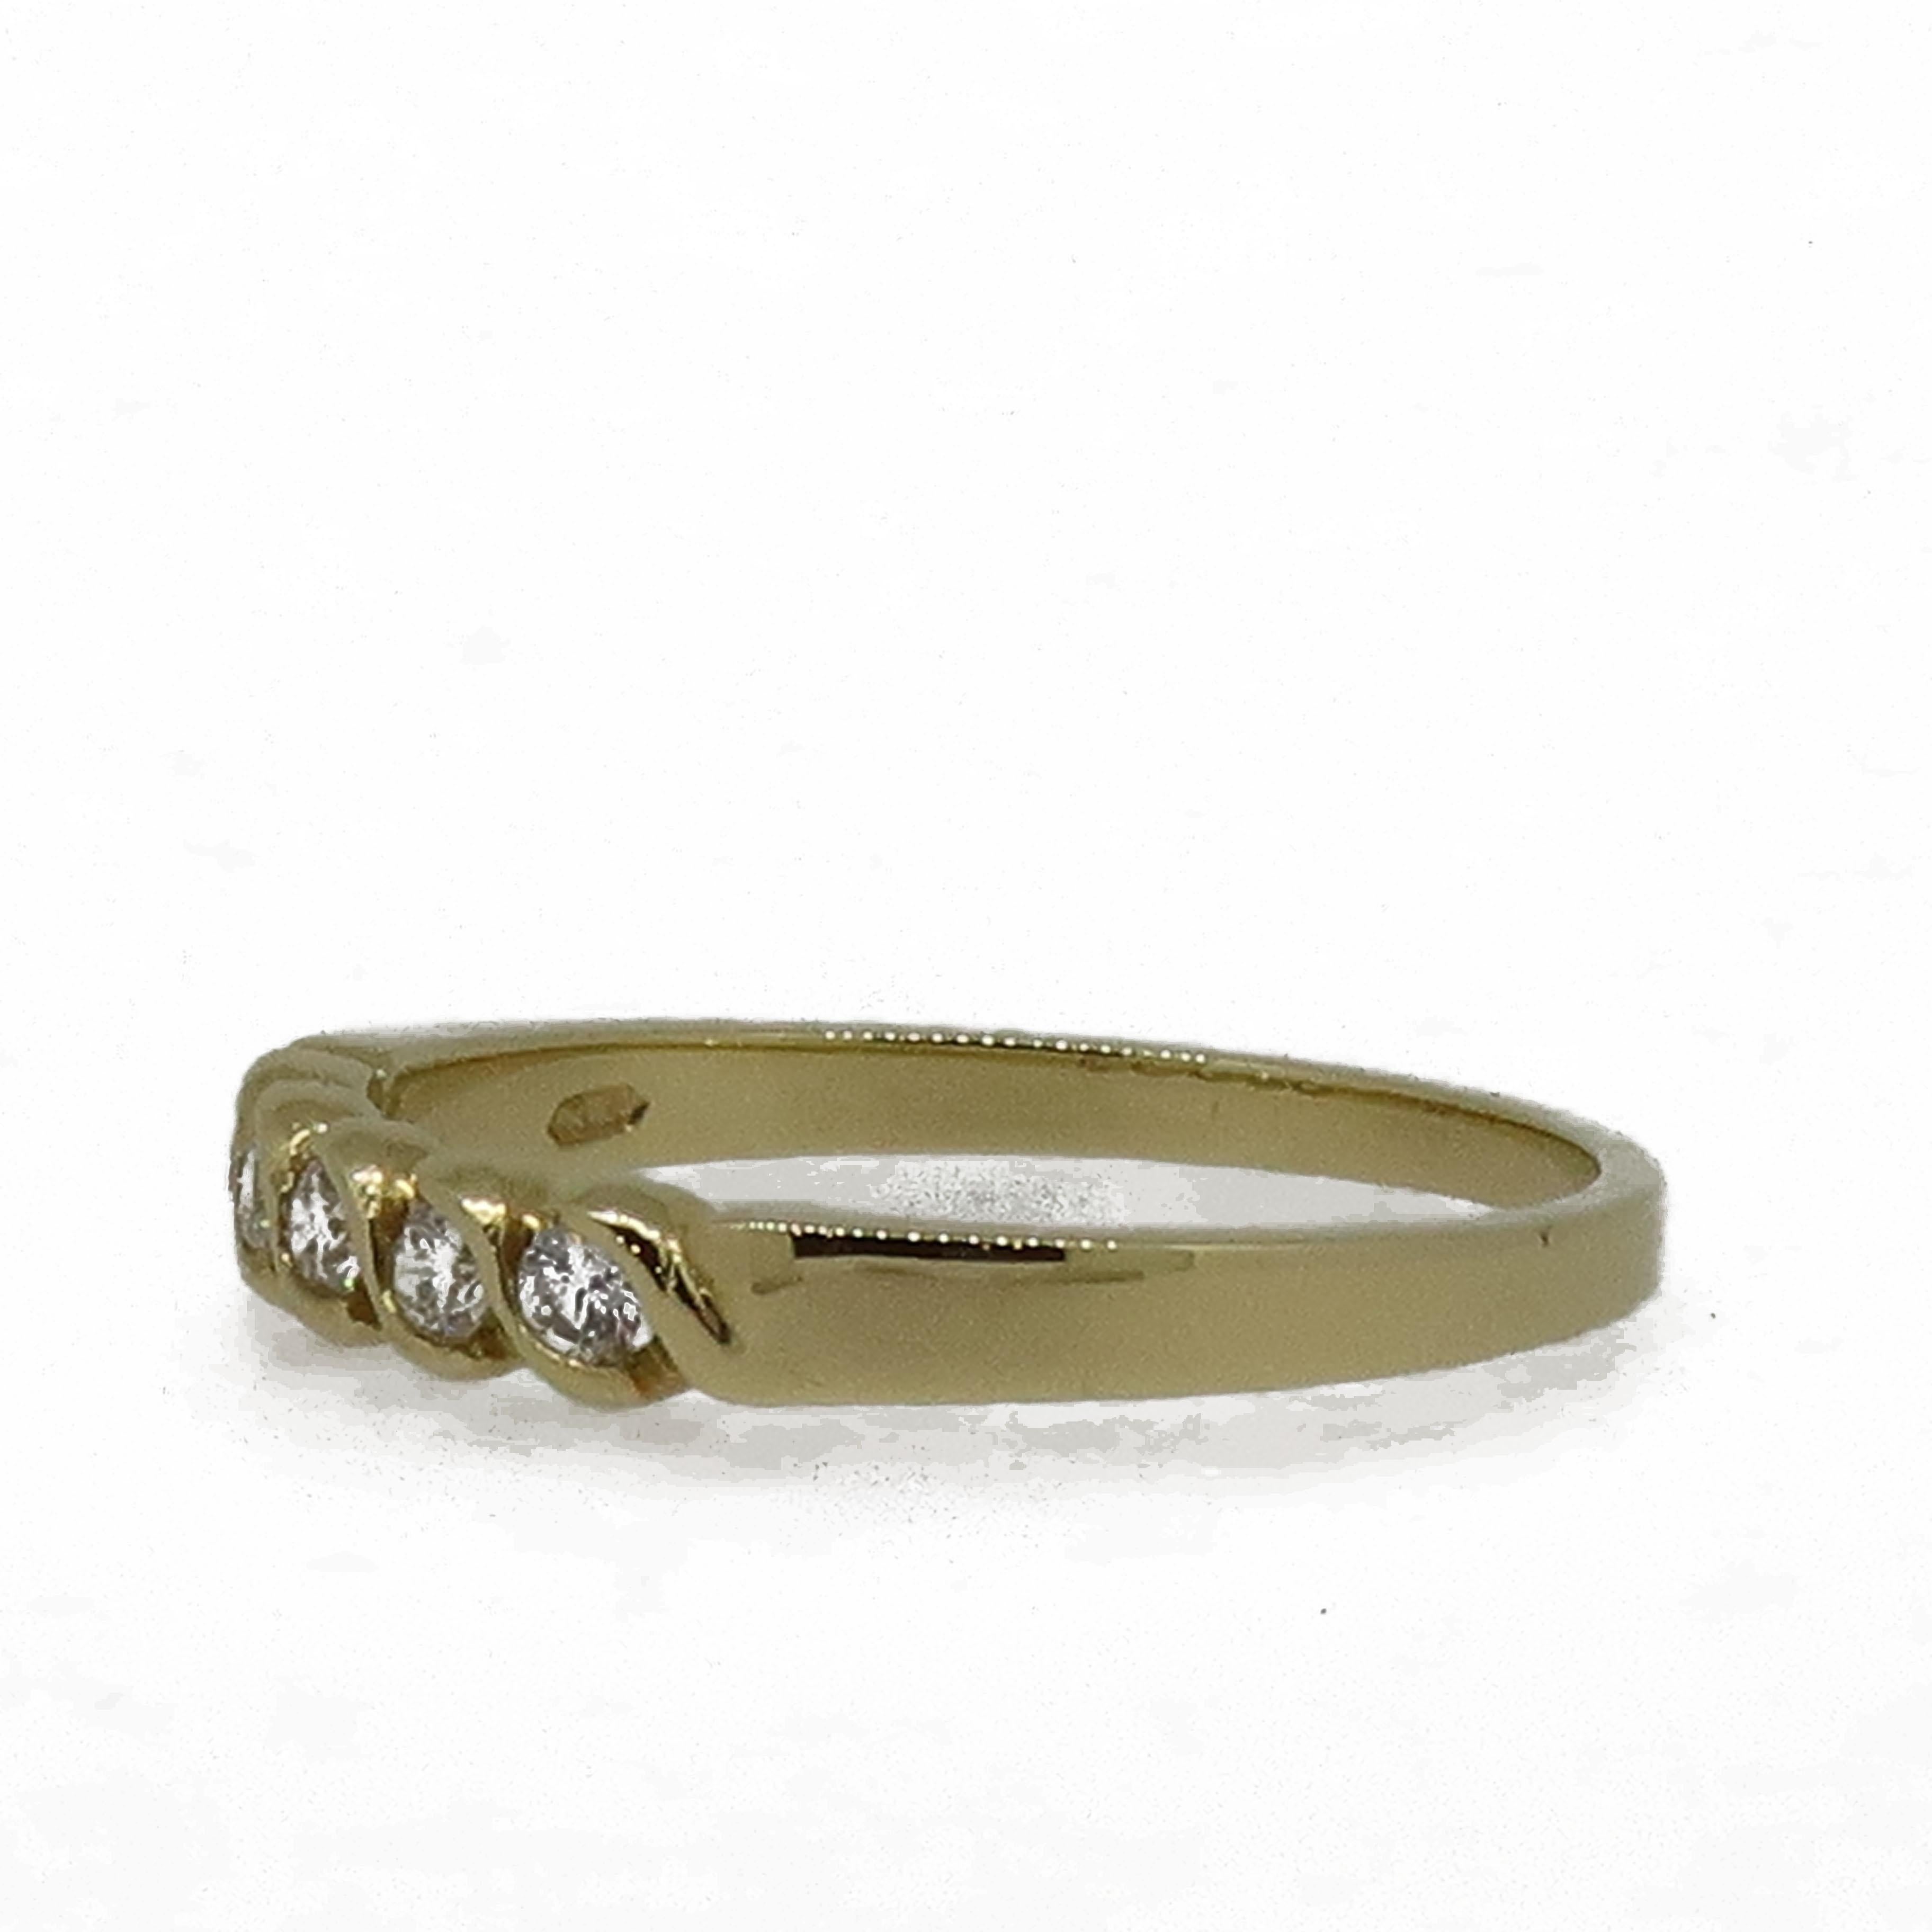 18 Karat Yellow Gold Diamond Eternity Band Ring

A delicate diamond eternity ring. Consisting of five white brilliant cut diamonds, weighing 0.16ct in total. The diamonds are set in a rub over S style setting.
It would make the perfect wedding band